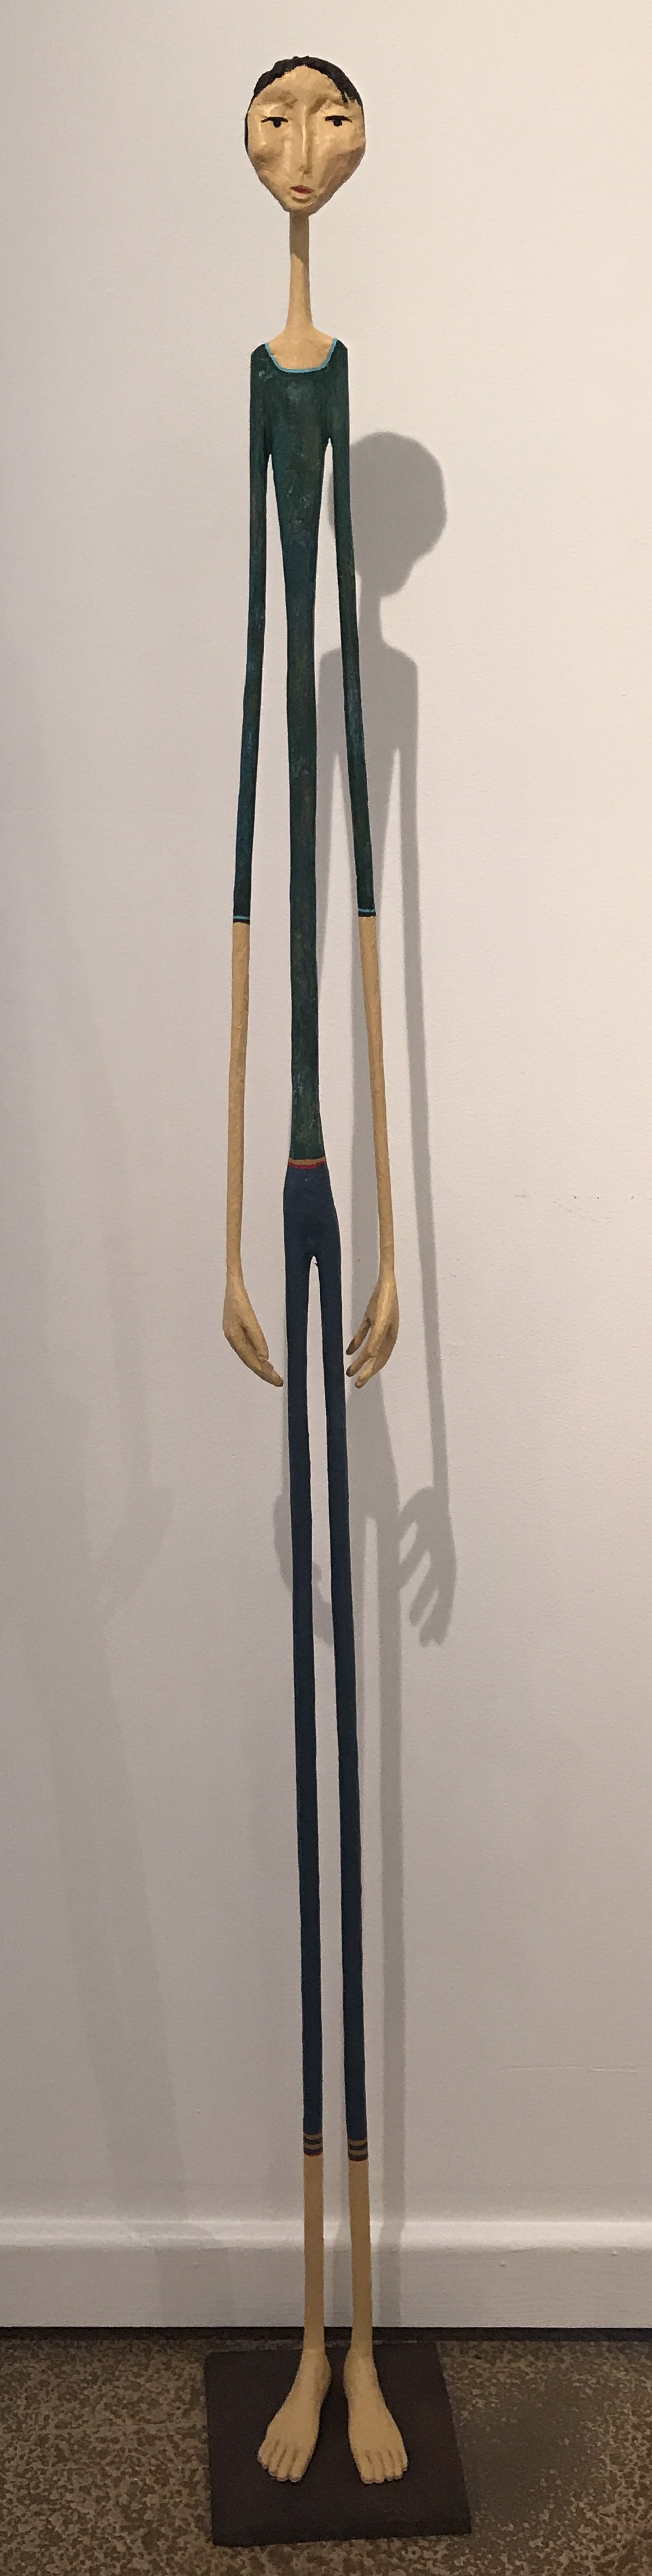 Long Fellows (Him - Colored) by Ruth Bloch